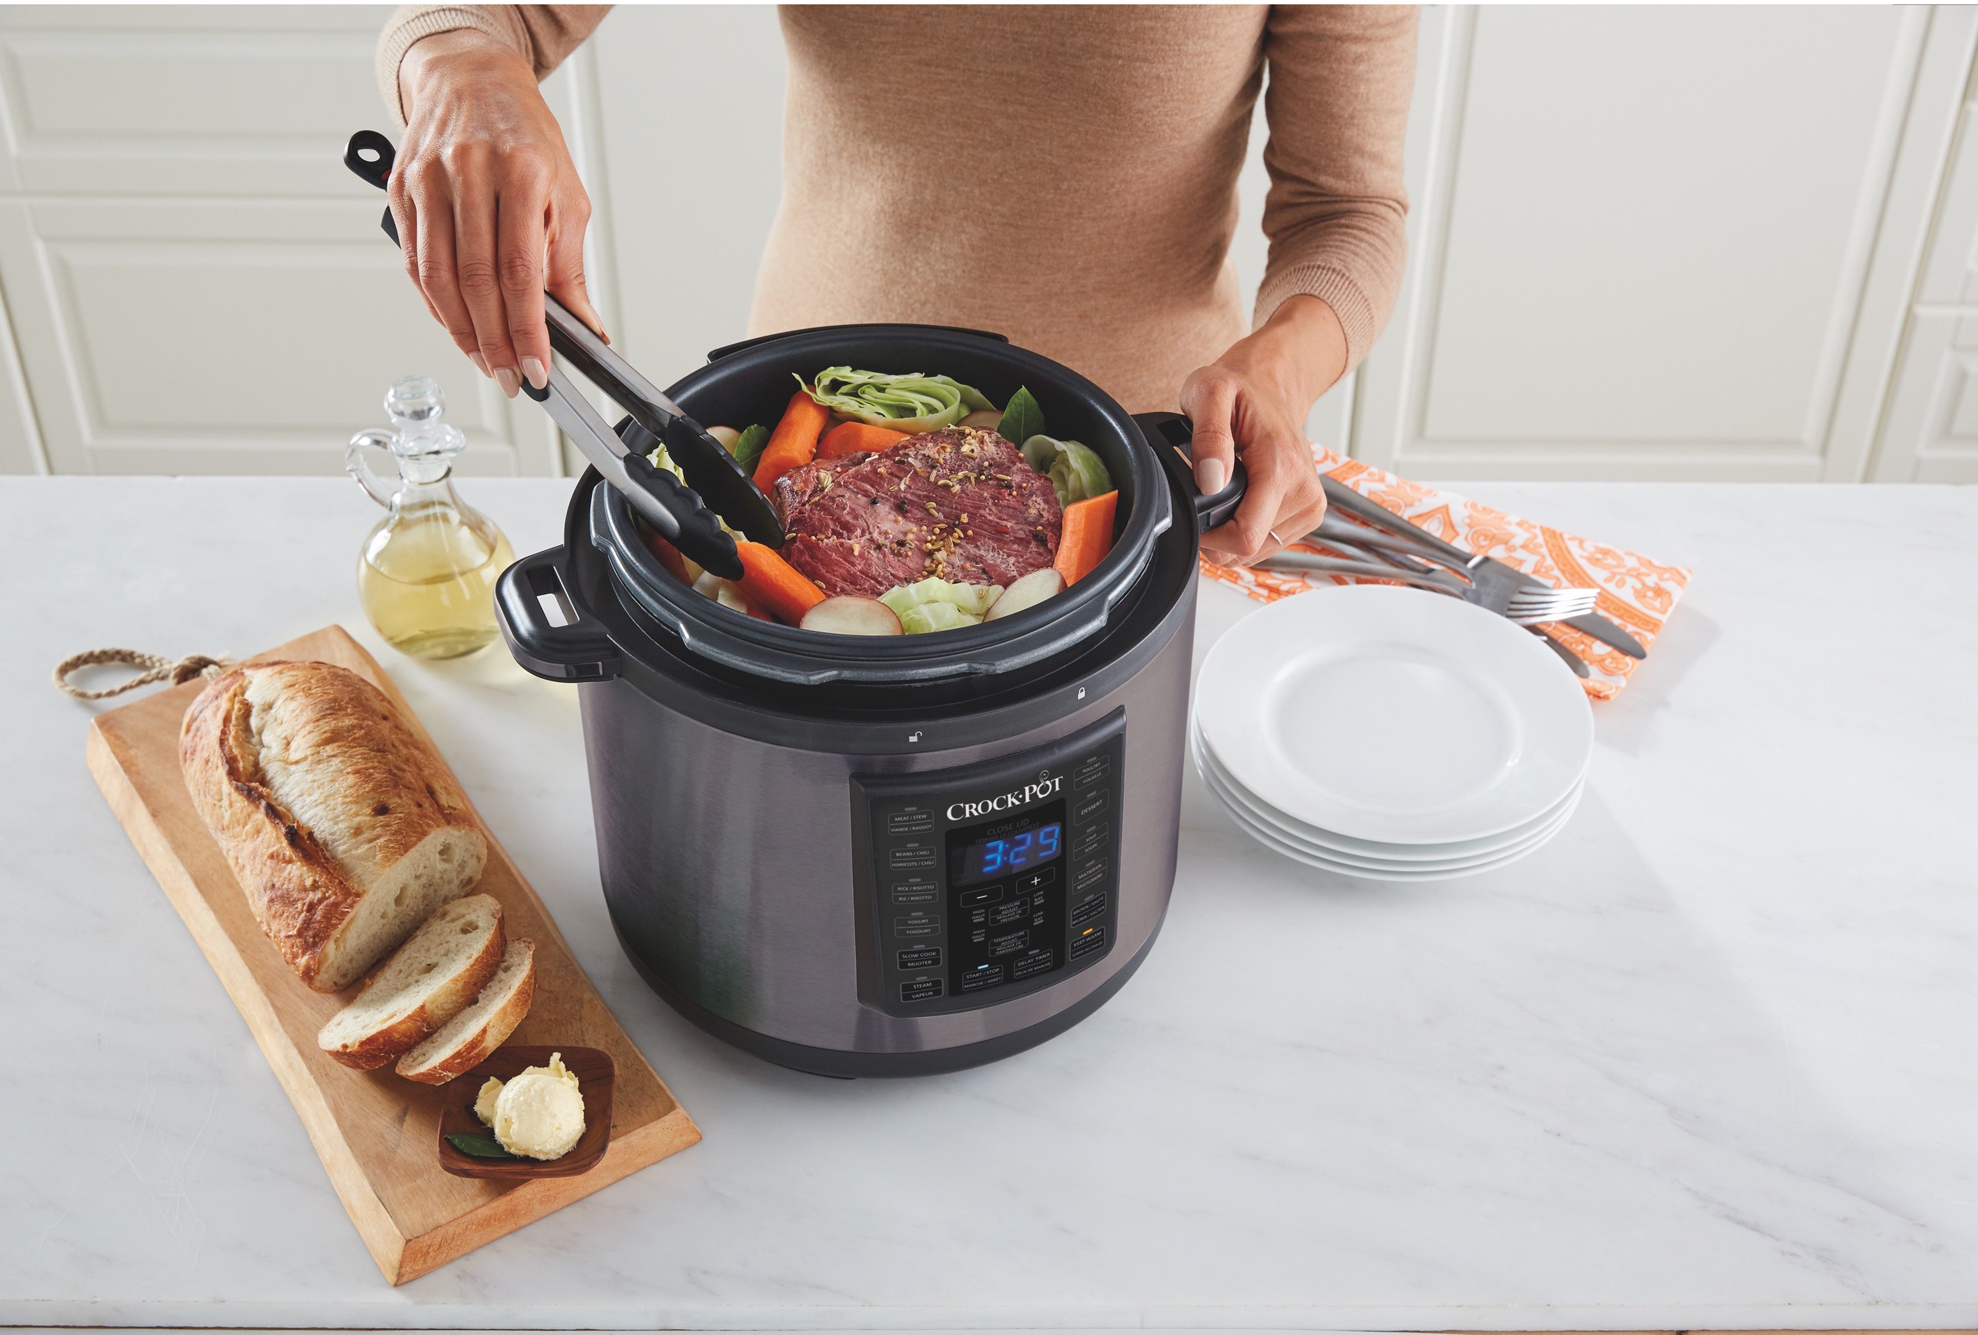 Crock-Pot 6 Qt 8-in-1 Multi-Use Express Crock Programmable Pressure Cooker, Slow Cooker, Sauté, and Steamer, Black Stainless Steel - image 5 of 10